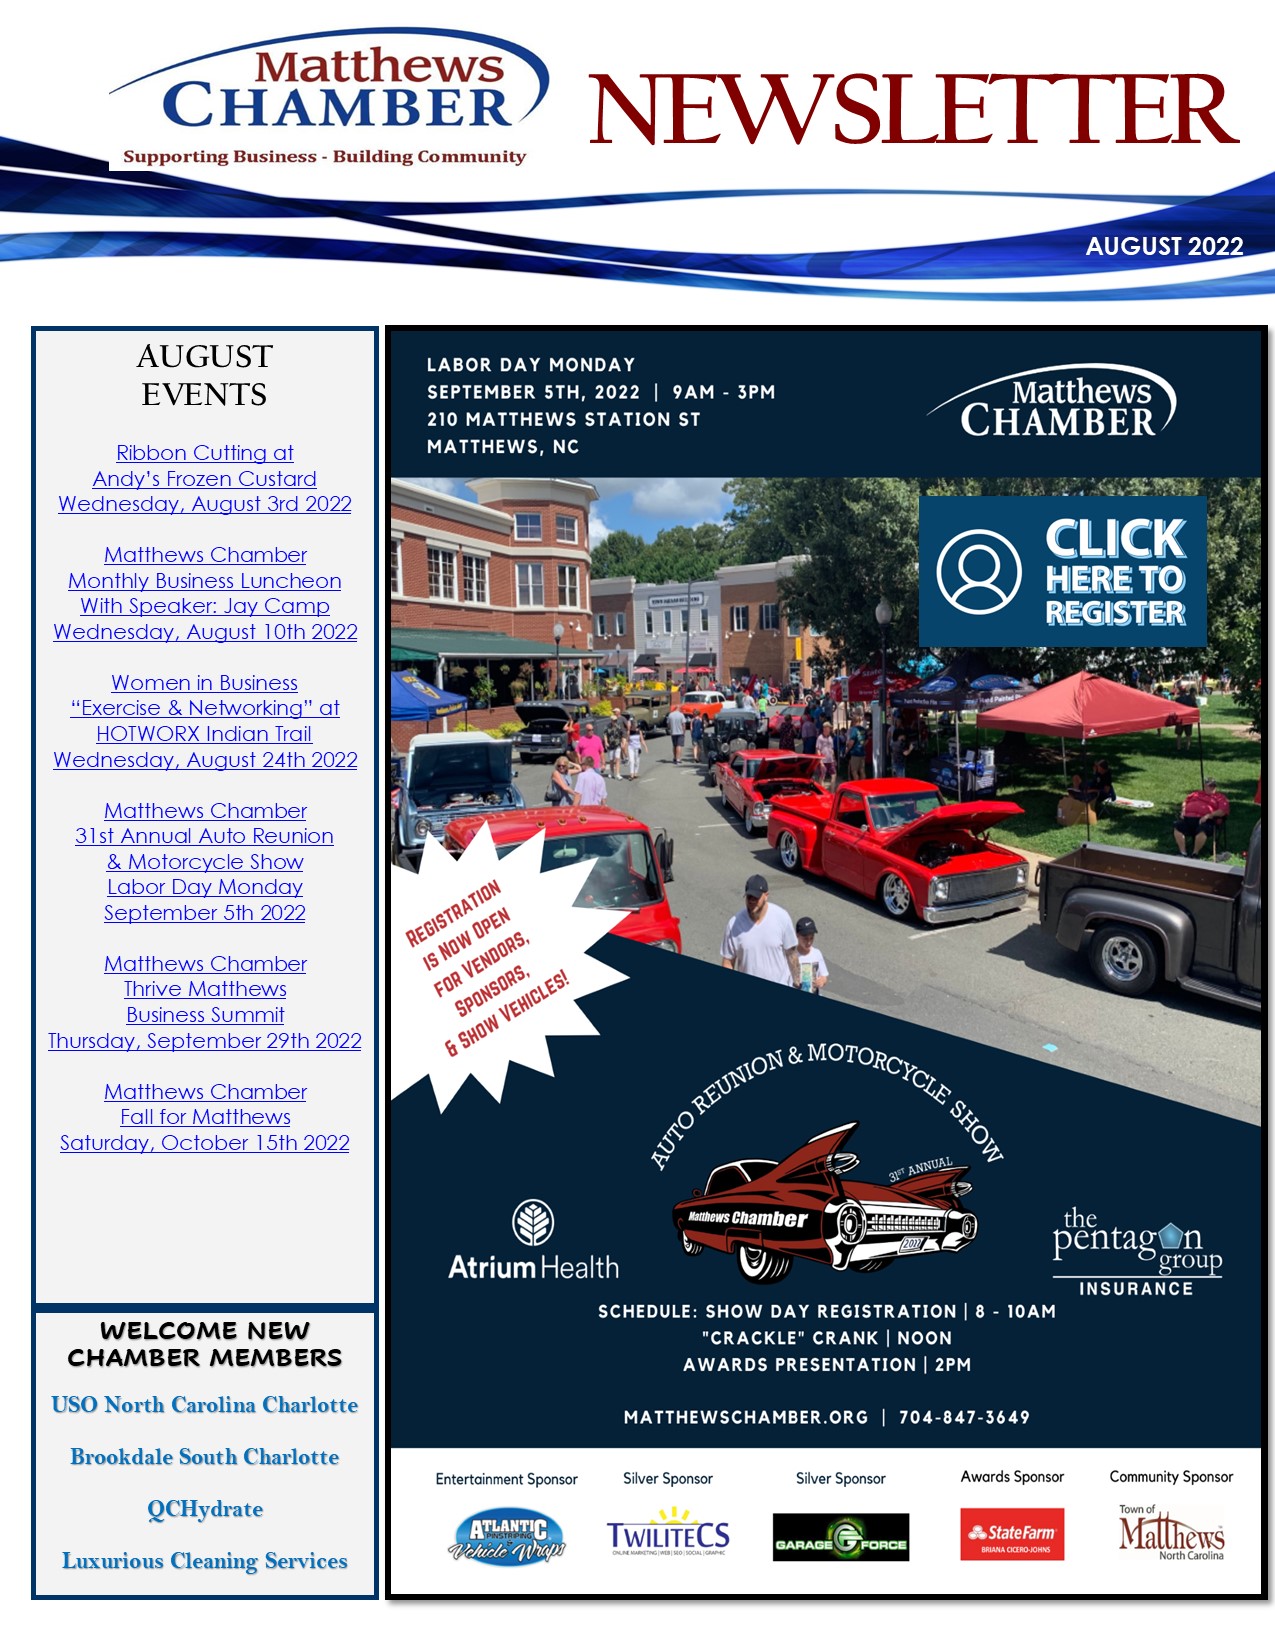 AUGUST 2022 NEWSLETTER – FRONT PAGE ONLY